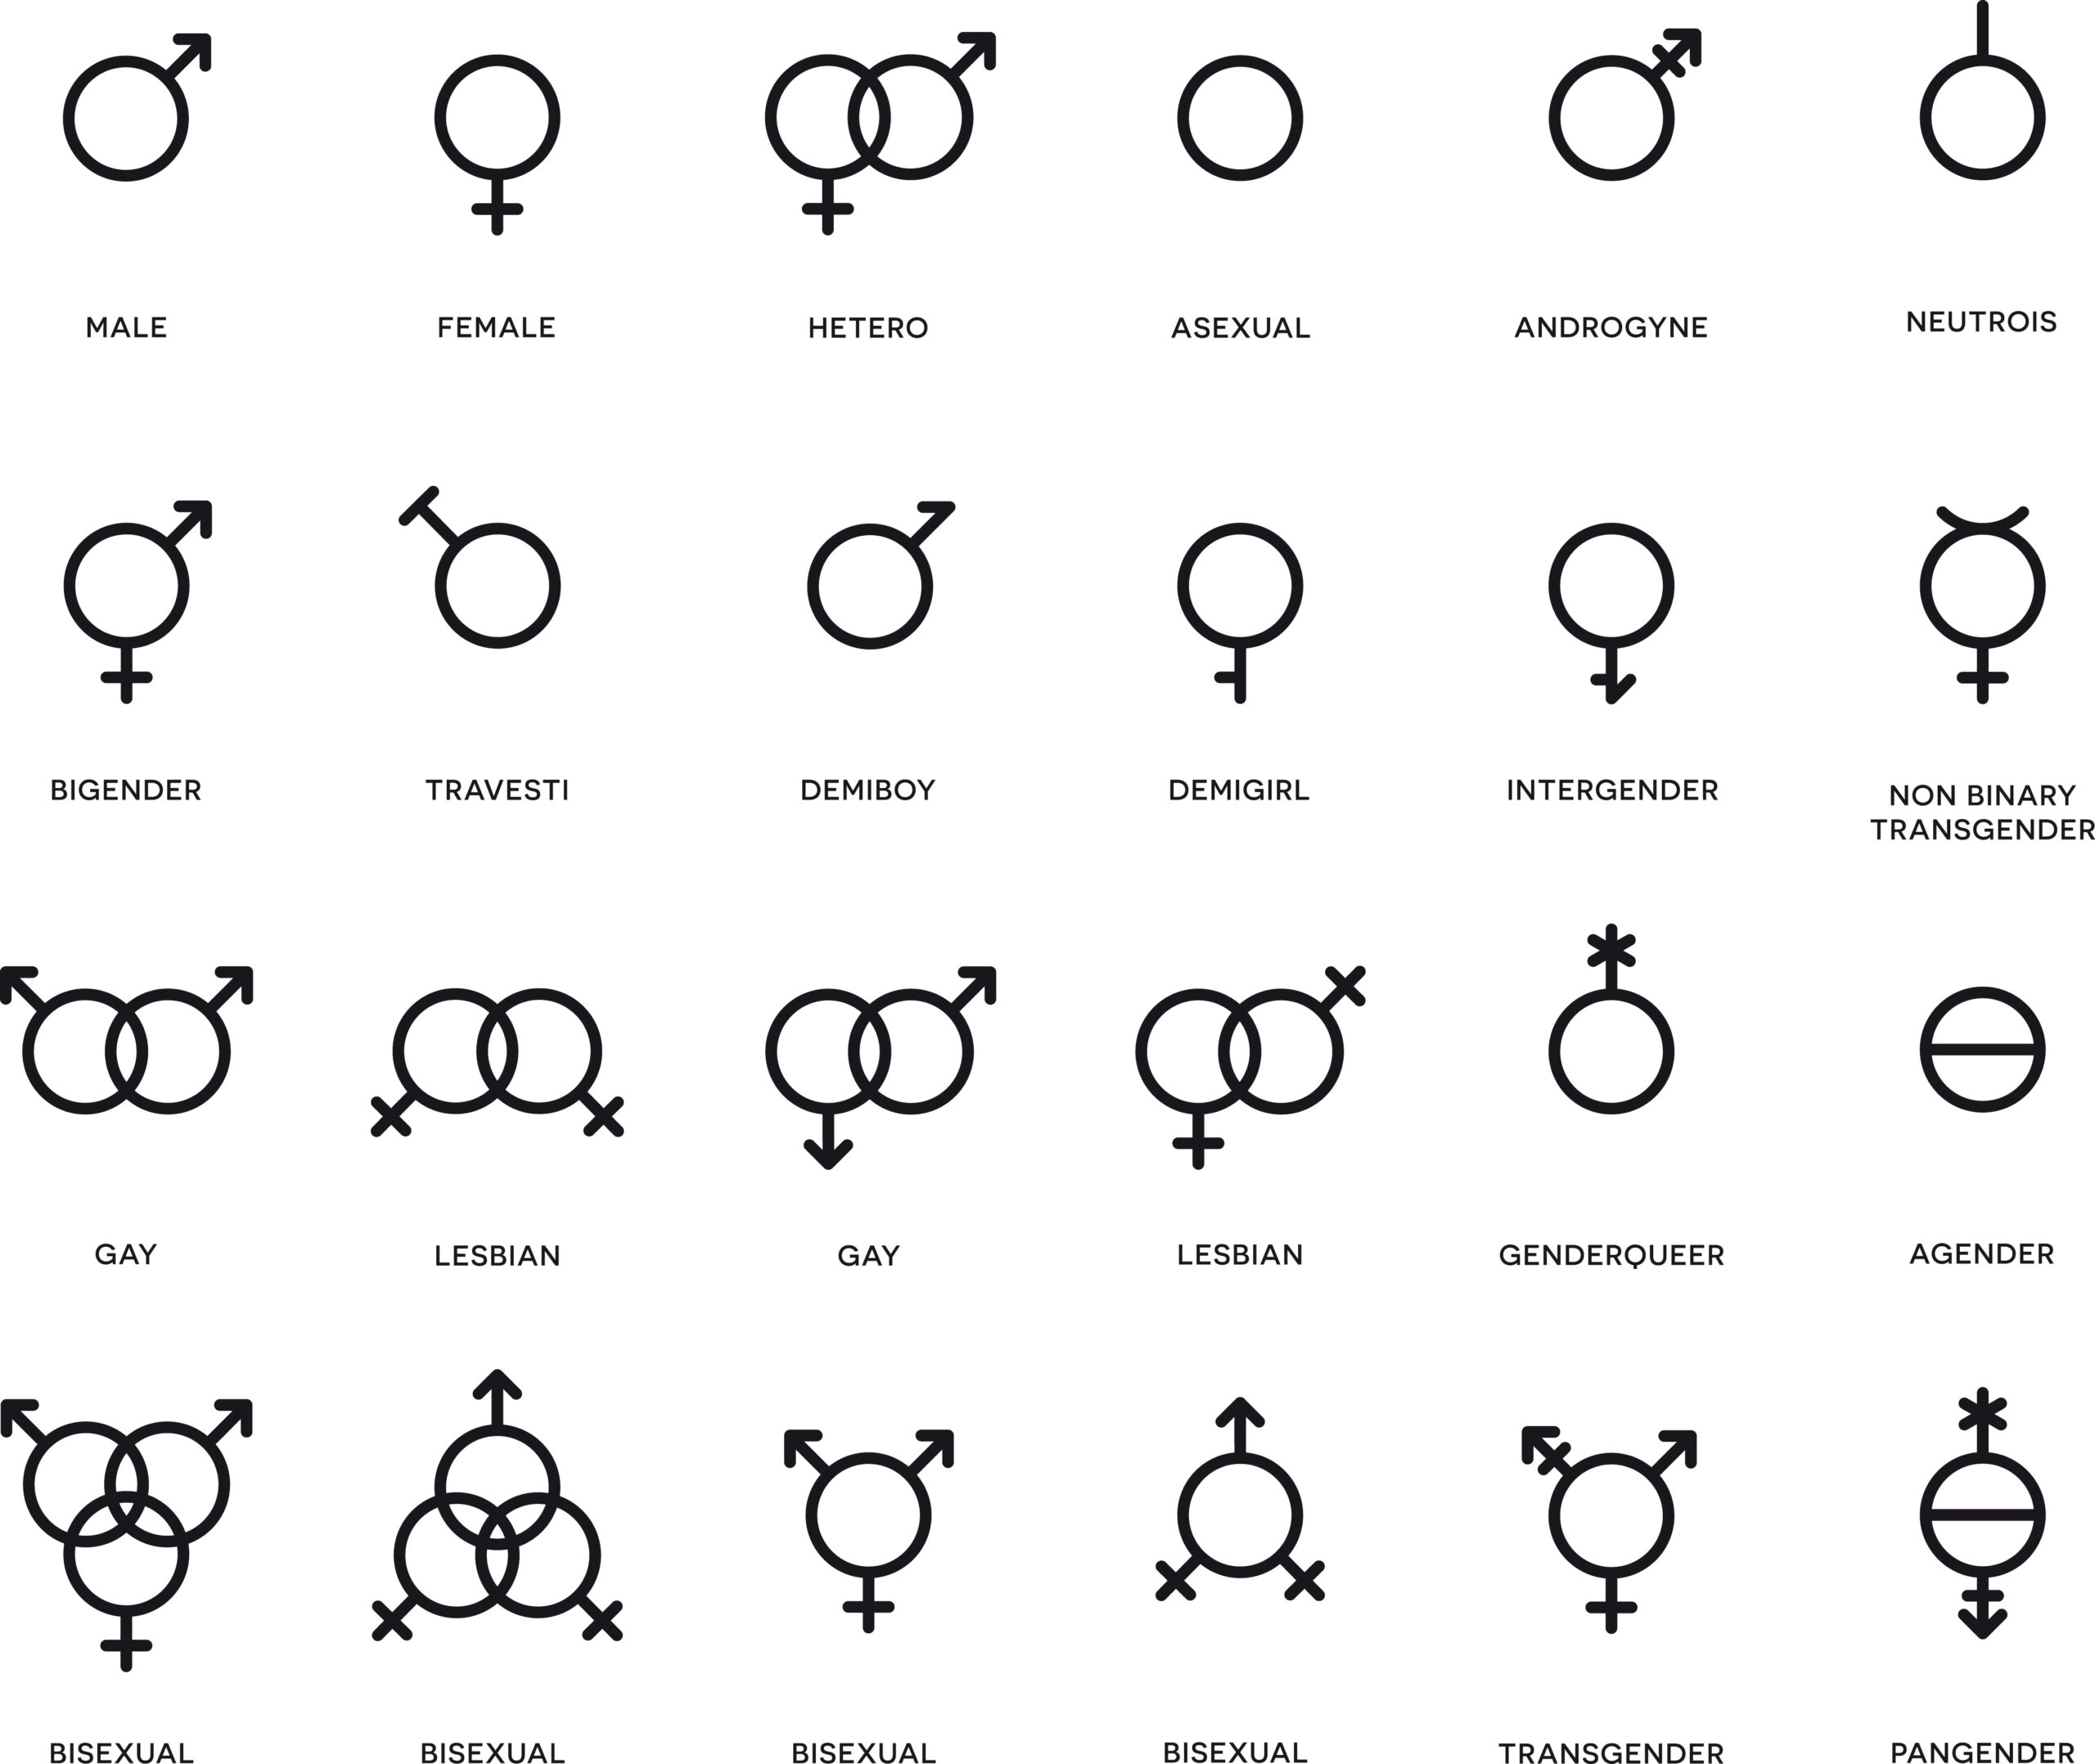 Diagram of various gender symbols derived from the ancient "male" and "female" symbols.